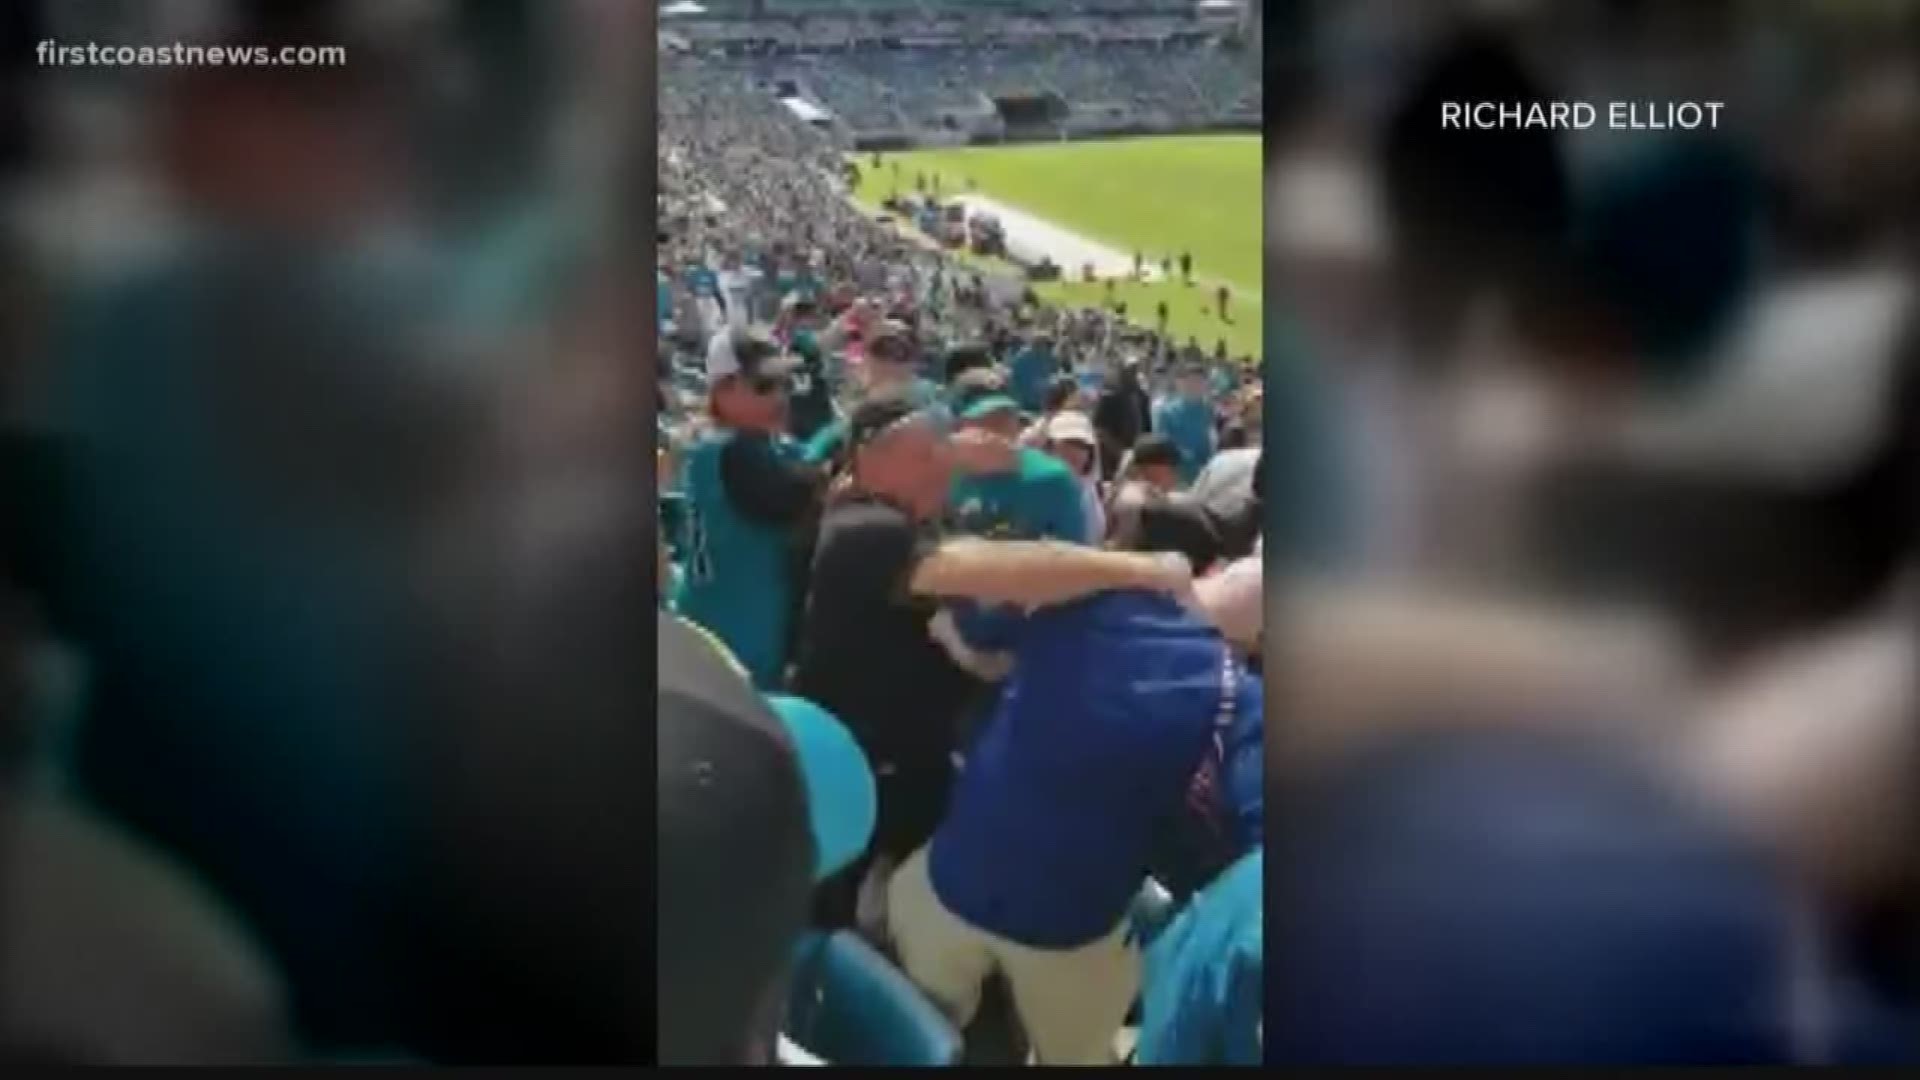 While the play on the field wasn't something to be proud of, the real shame came in the stands as fans were thrown out following a brawl.